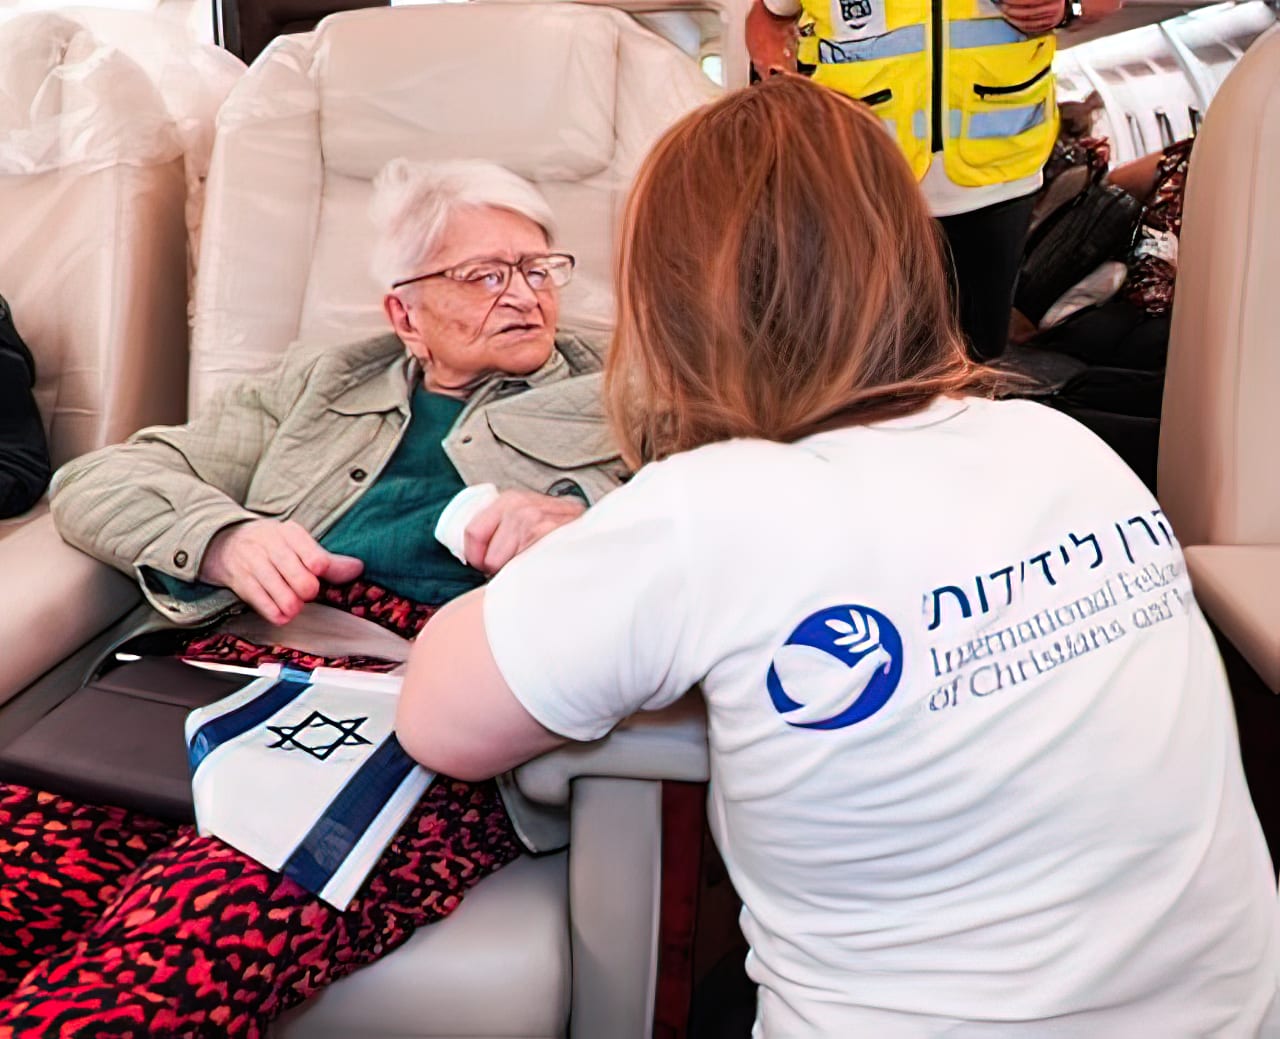 The International Fellowship of Christians and Jews now offers emergency medical flights to assist disabled elderly as they evacuate Ukraine